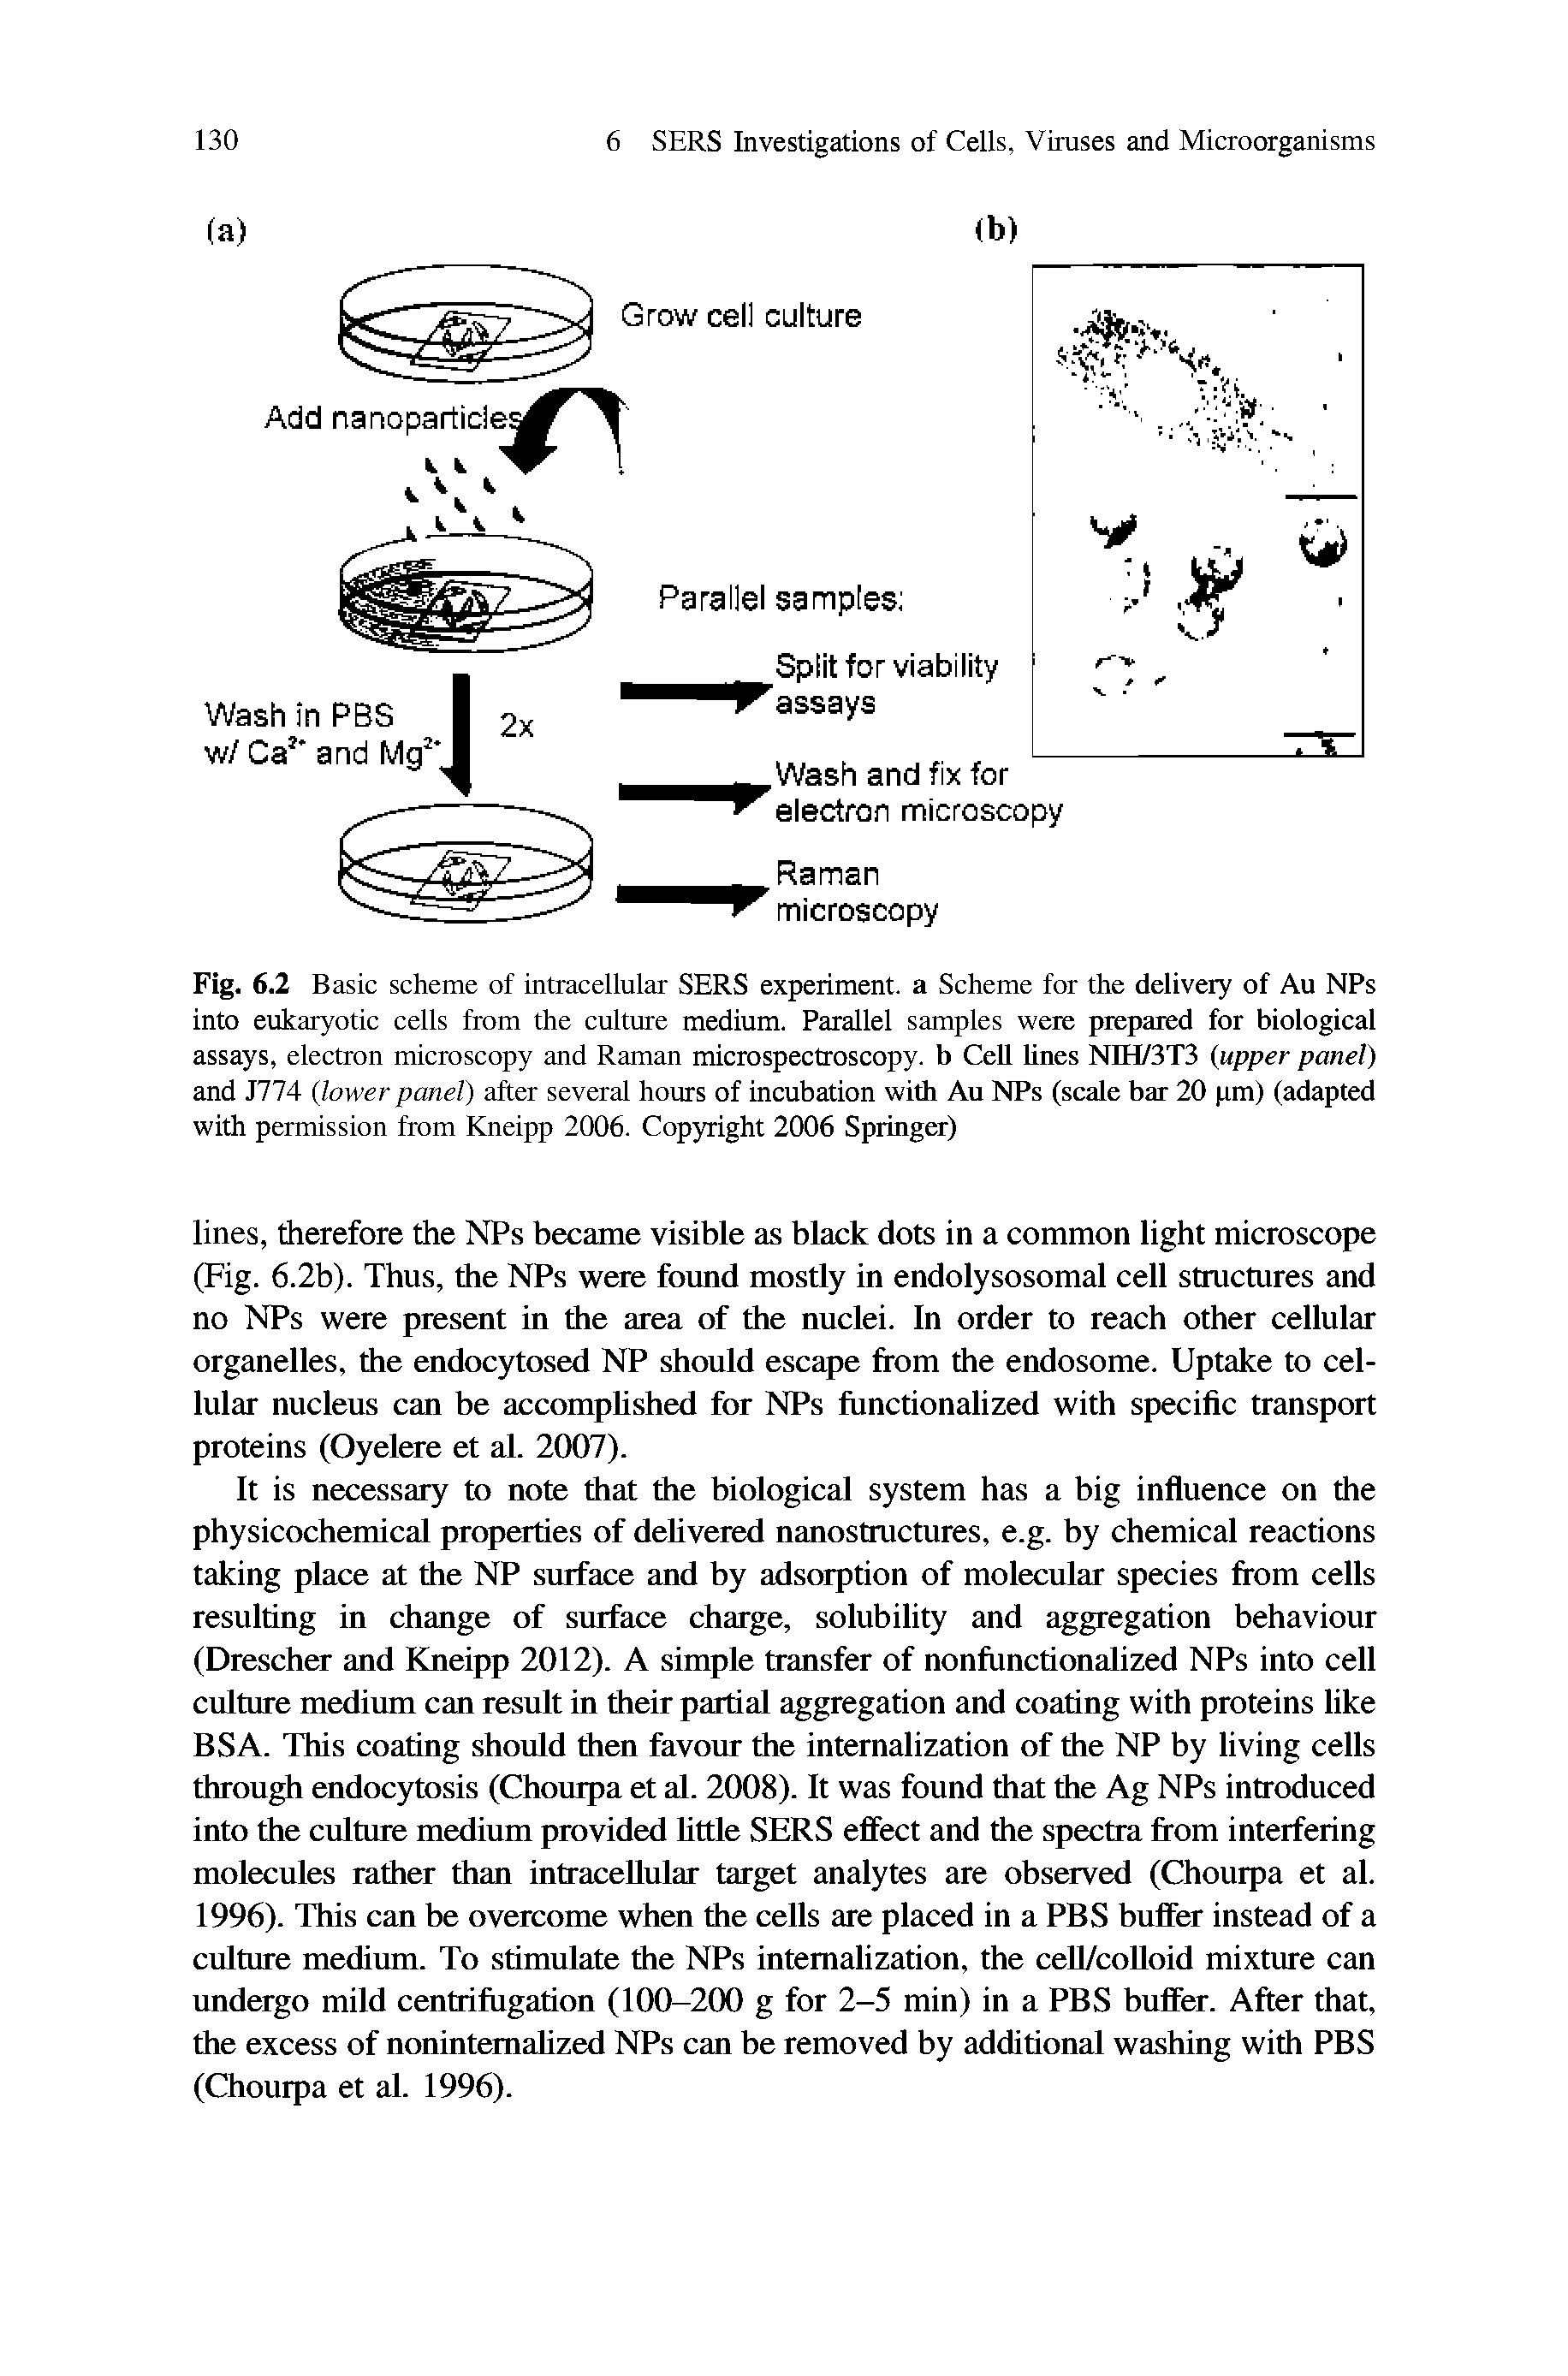 Fig. 6.2 Basic scheme of intracellular SERS experiment, a Scheme for the delivery of Au NPs into eukaryotic cells from the culture medium. Parallel samples were prepared for biological assays, electron microscopy and Raman microspectroscopy, b Cell lines NIH/3T3 upper panel) and J774 lower panel) after several hours of incubation with Au NPs (scale bar 20 pm) (adapted with permission from Kneipp 2006. Copyright 2006 Springtar)...